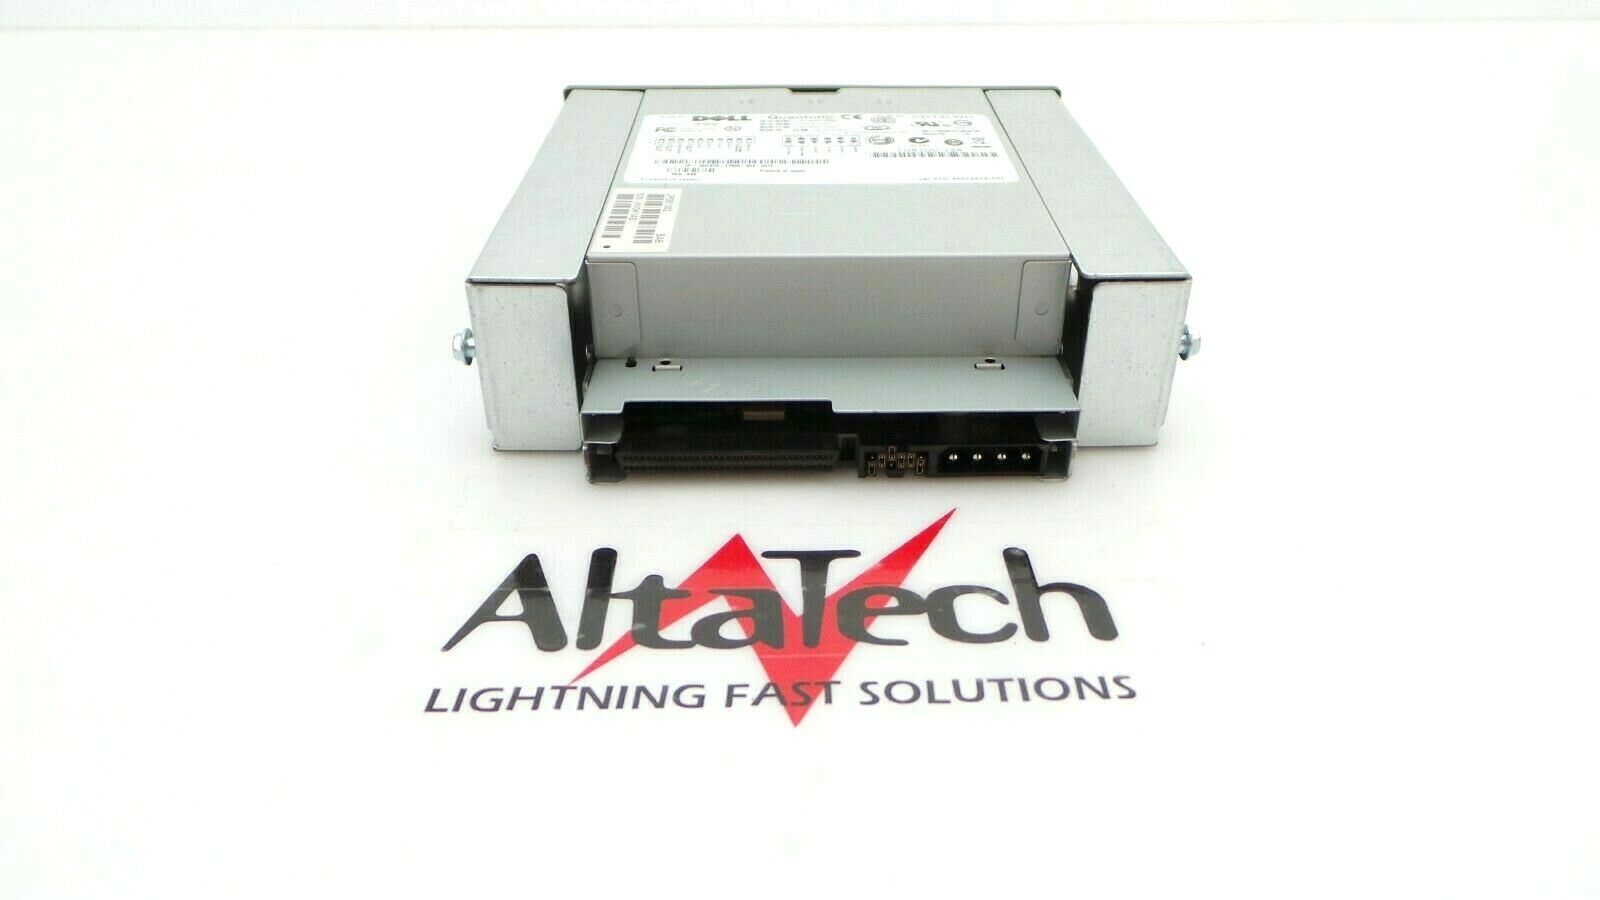 Dell 0DF675 CD72LWH Quantum DAT72i DDS-5 4mm SCSI LVD Internal Tape Drive, Used